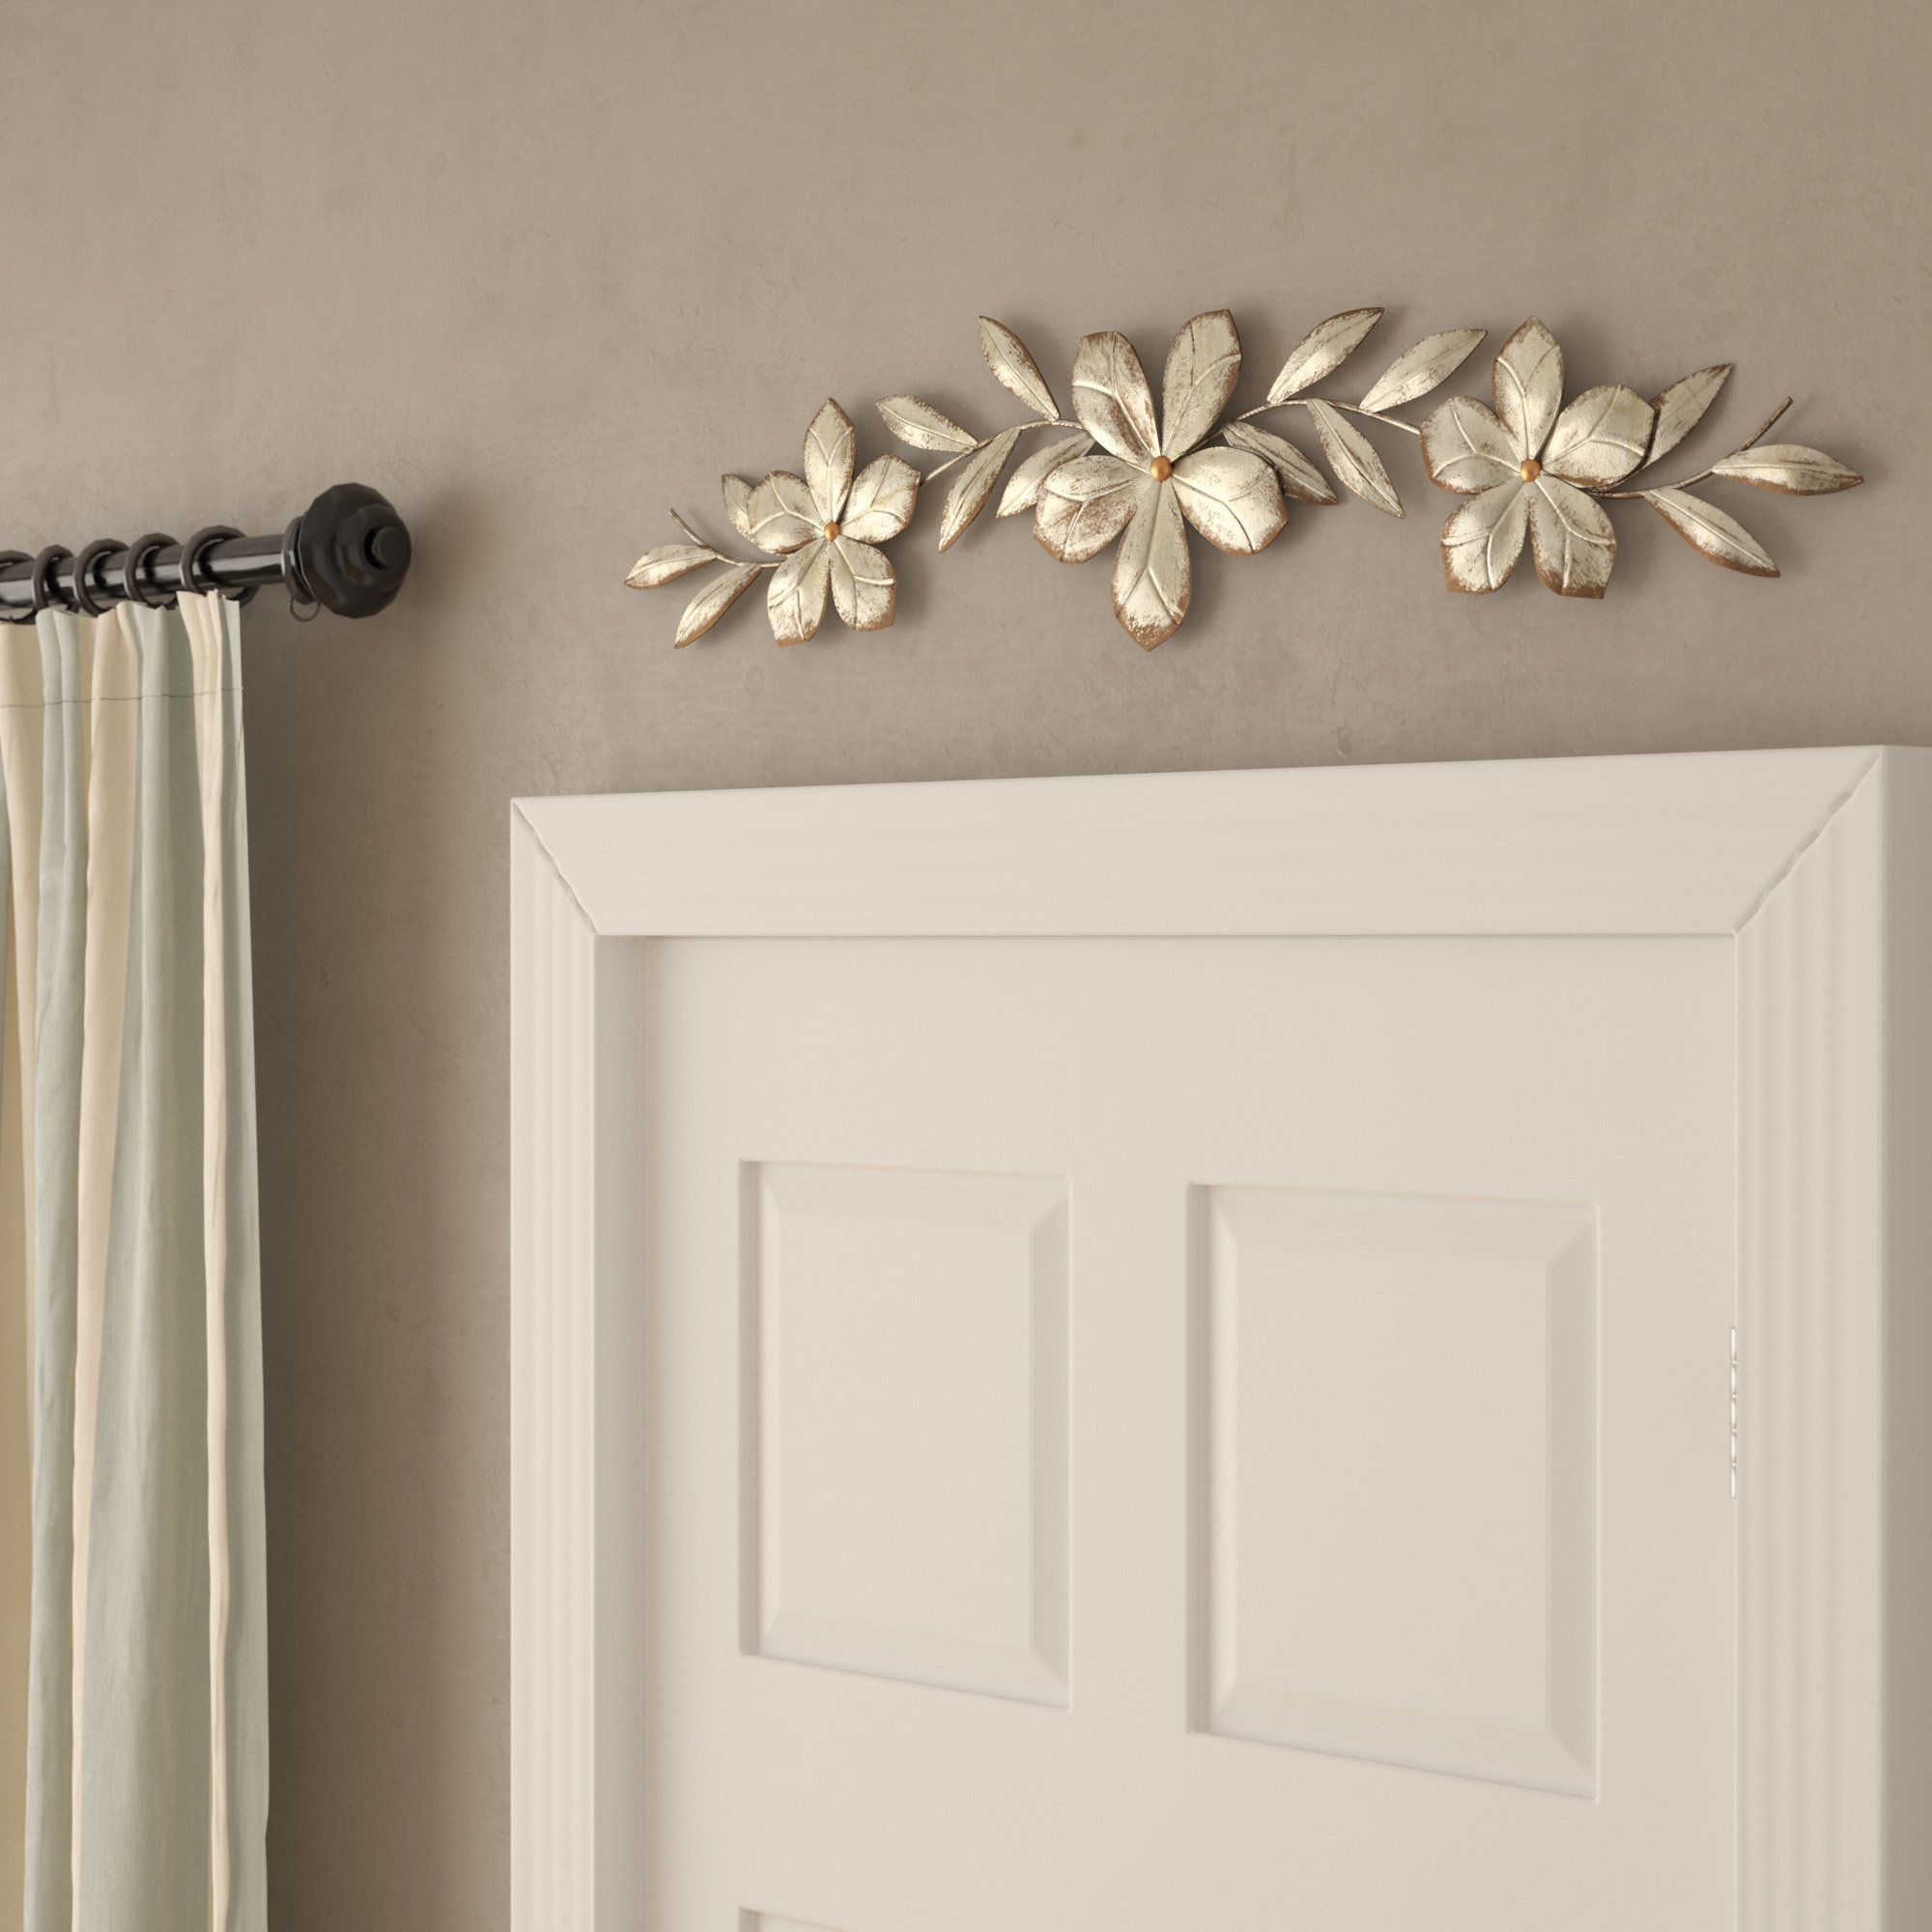 Wood Door Wall Decor | Wayfair For Floral Patterned Over The Door Wall Decor (Photo 2 of 30)